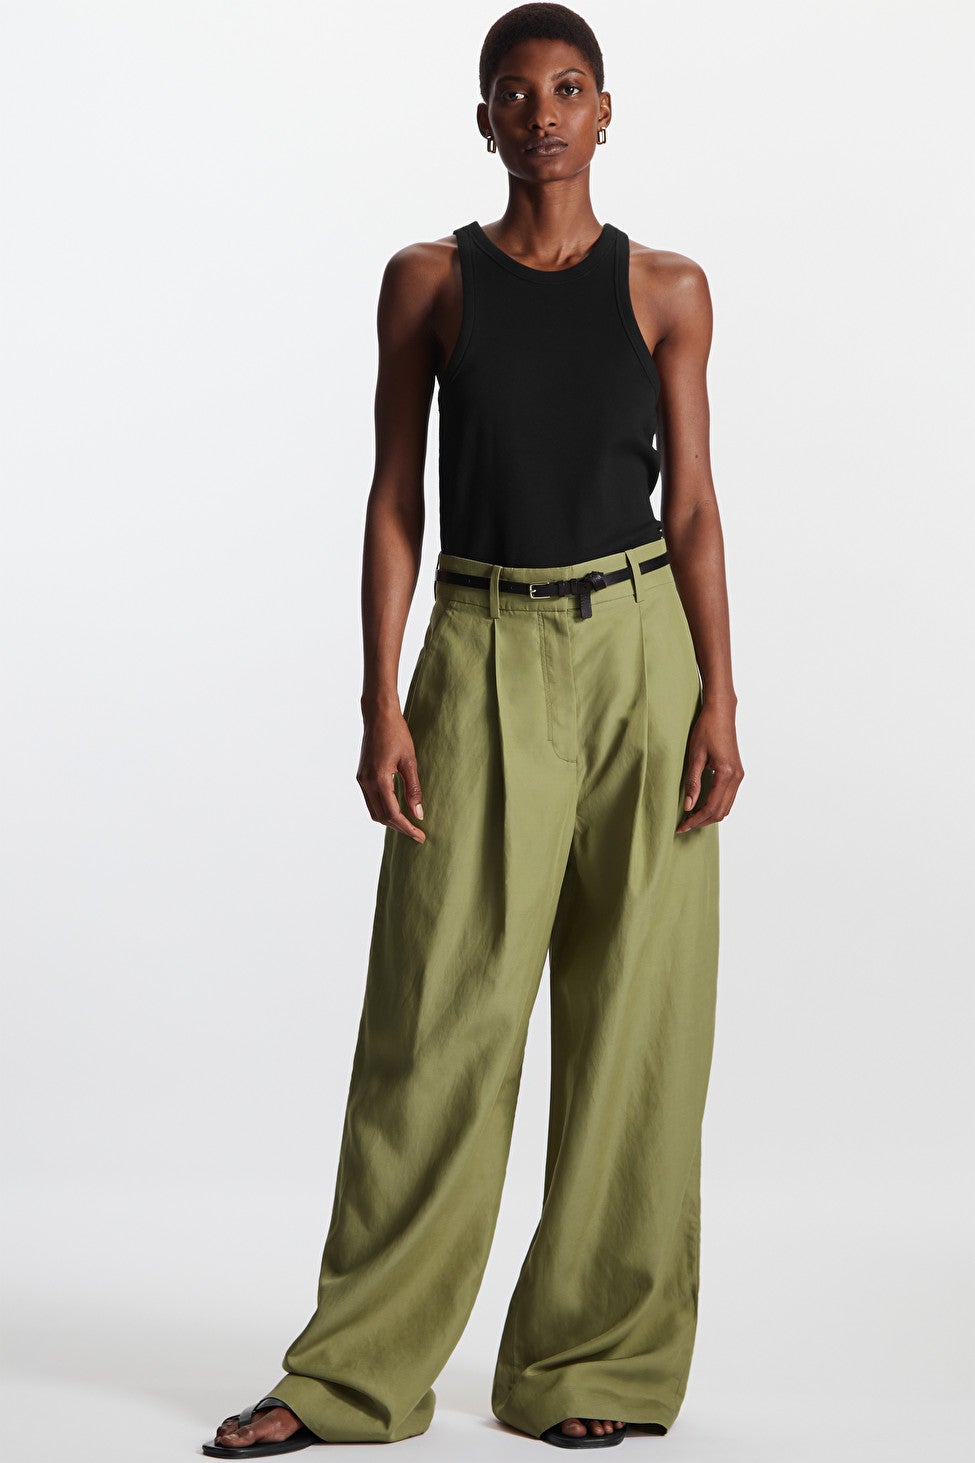 COS - Relaxed cuts for a relaxed mood. From barrel culottes to  sportswear-inspired shapes, our trousers are made for striding into summer.  ​ Shop women's trousers: https://bit.ly/2XGfME7 | Facebook